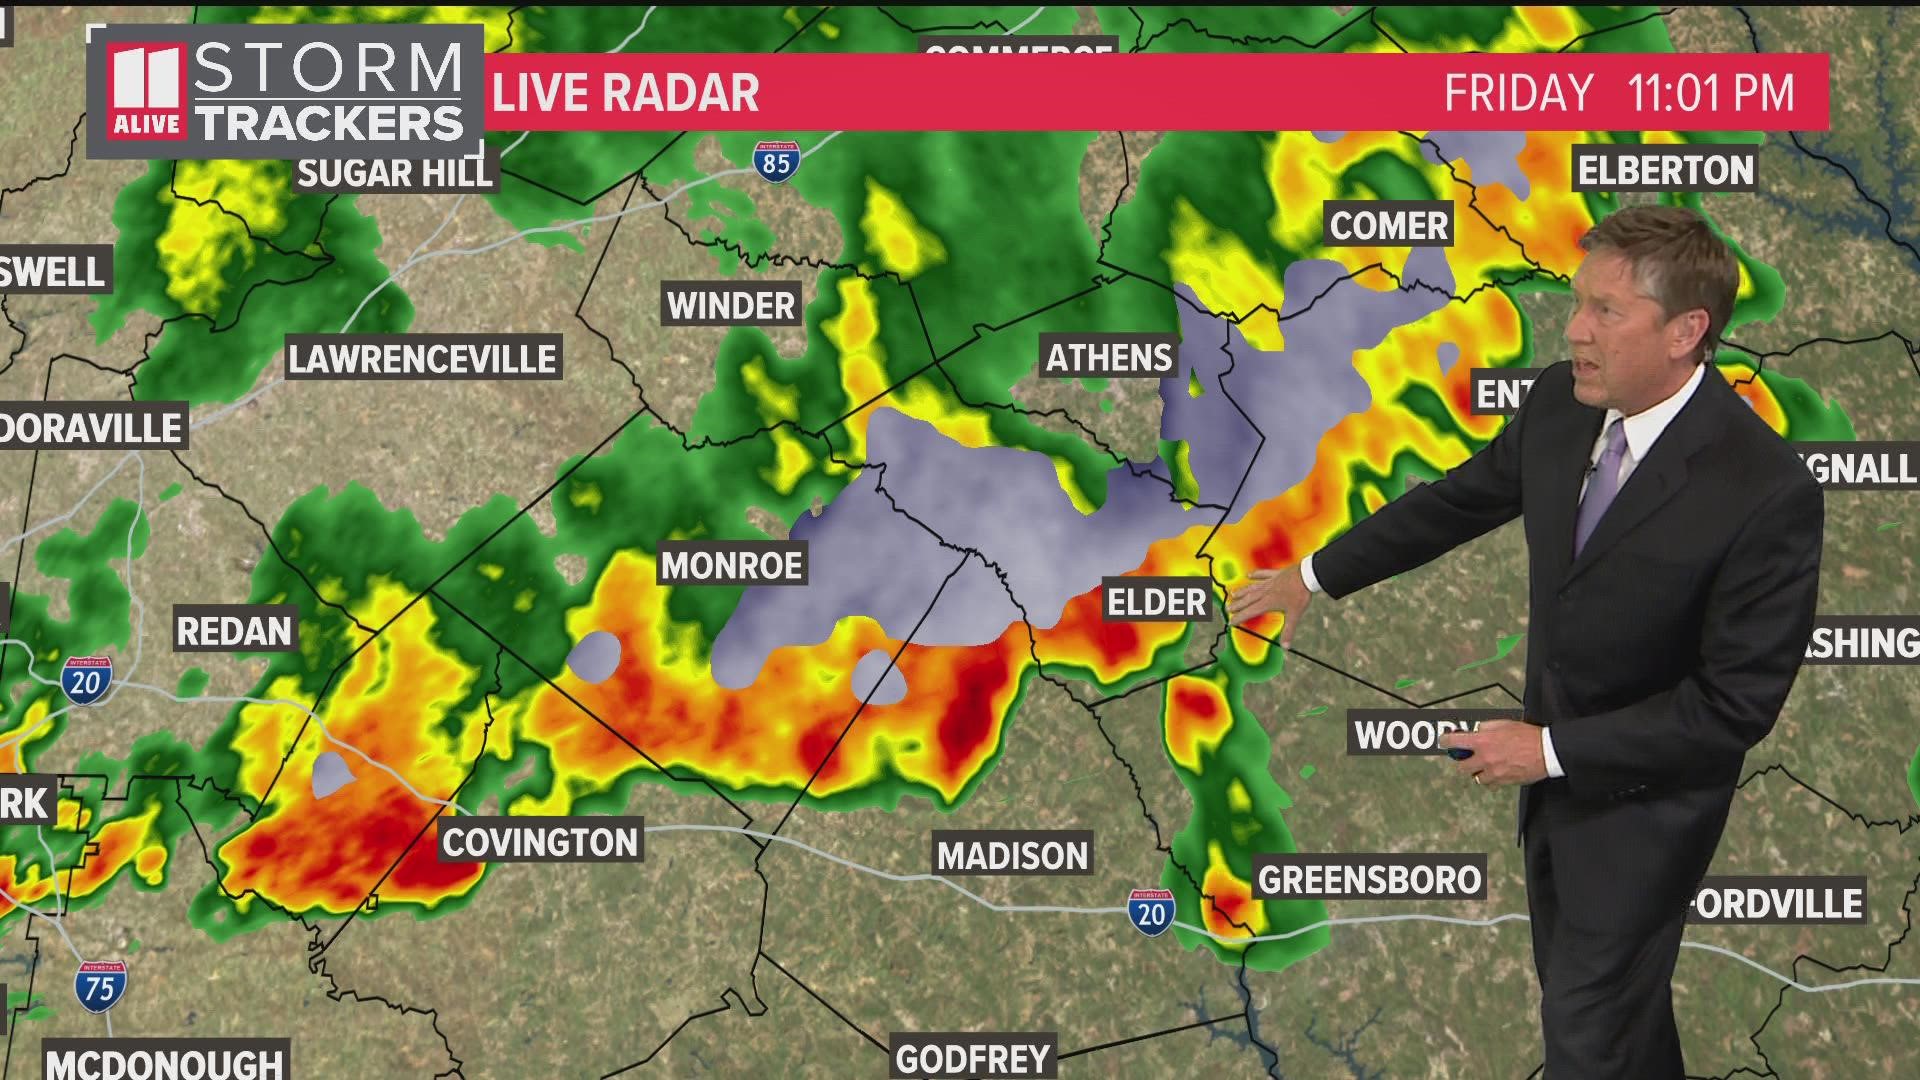 11Alive will track the rain and storms as it moves through the area.